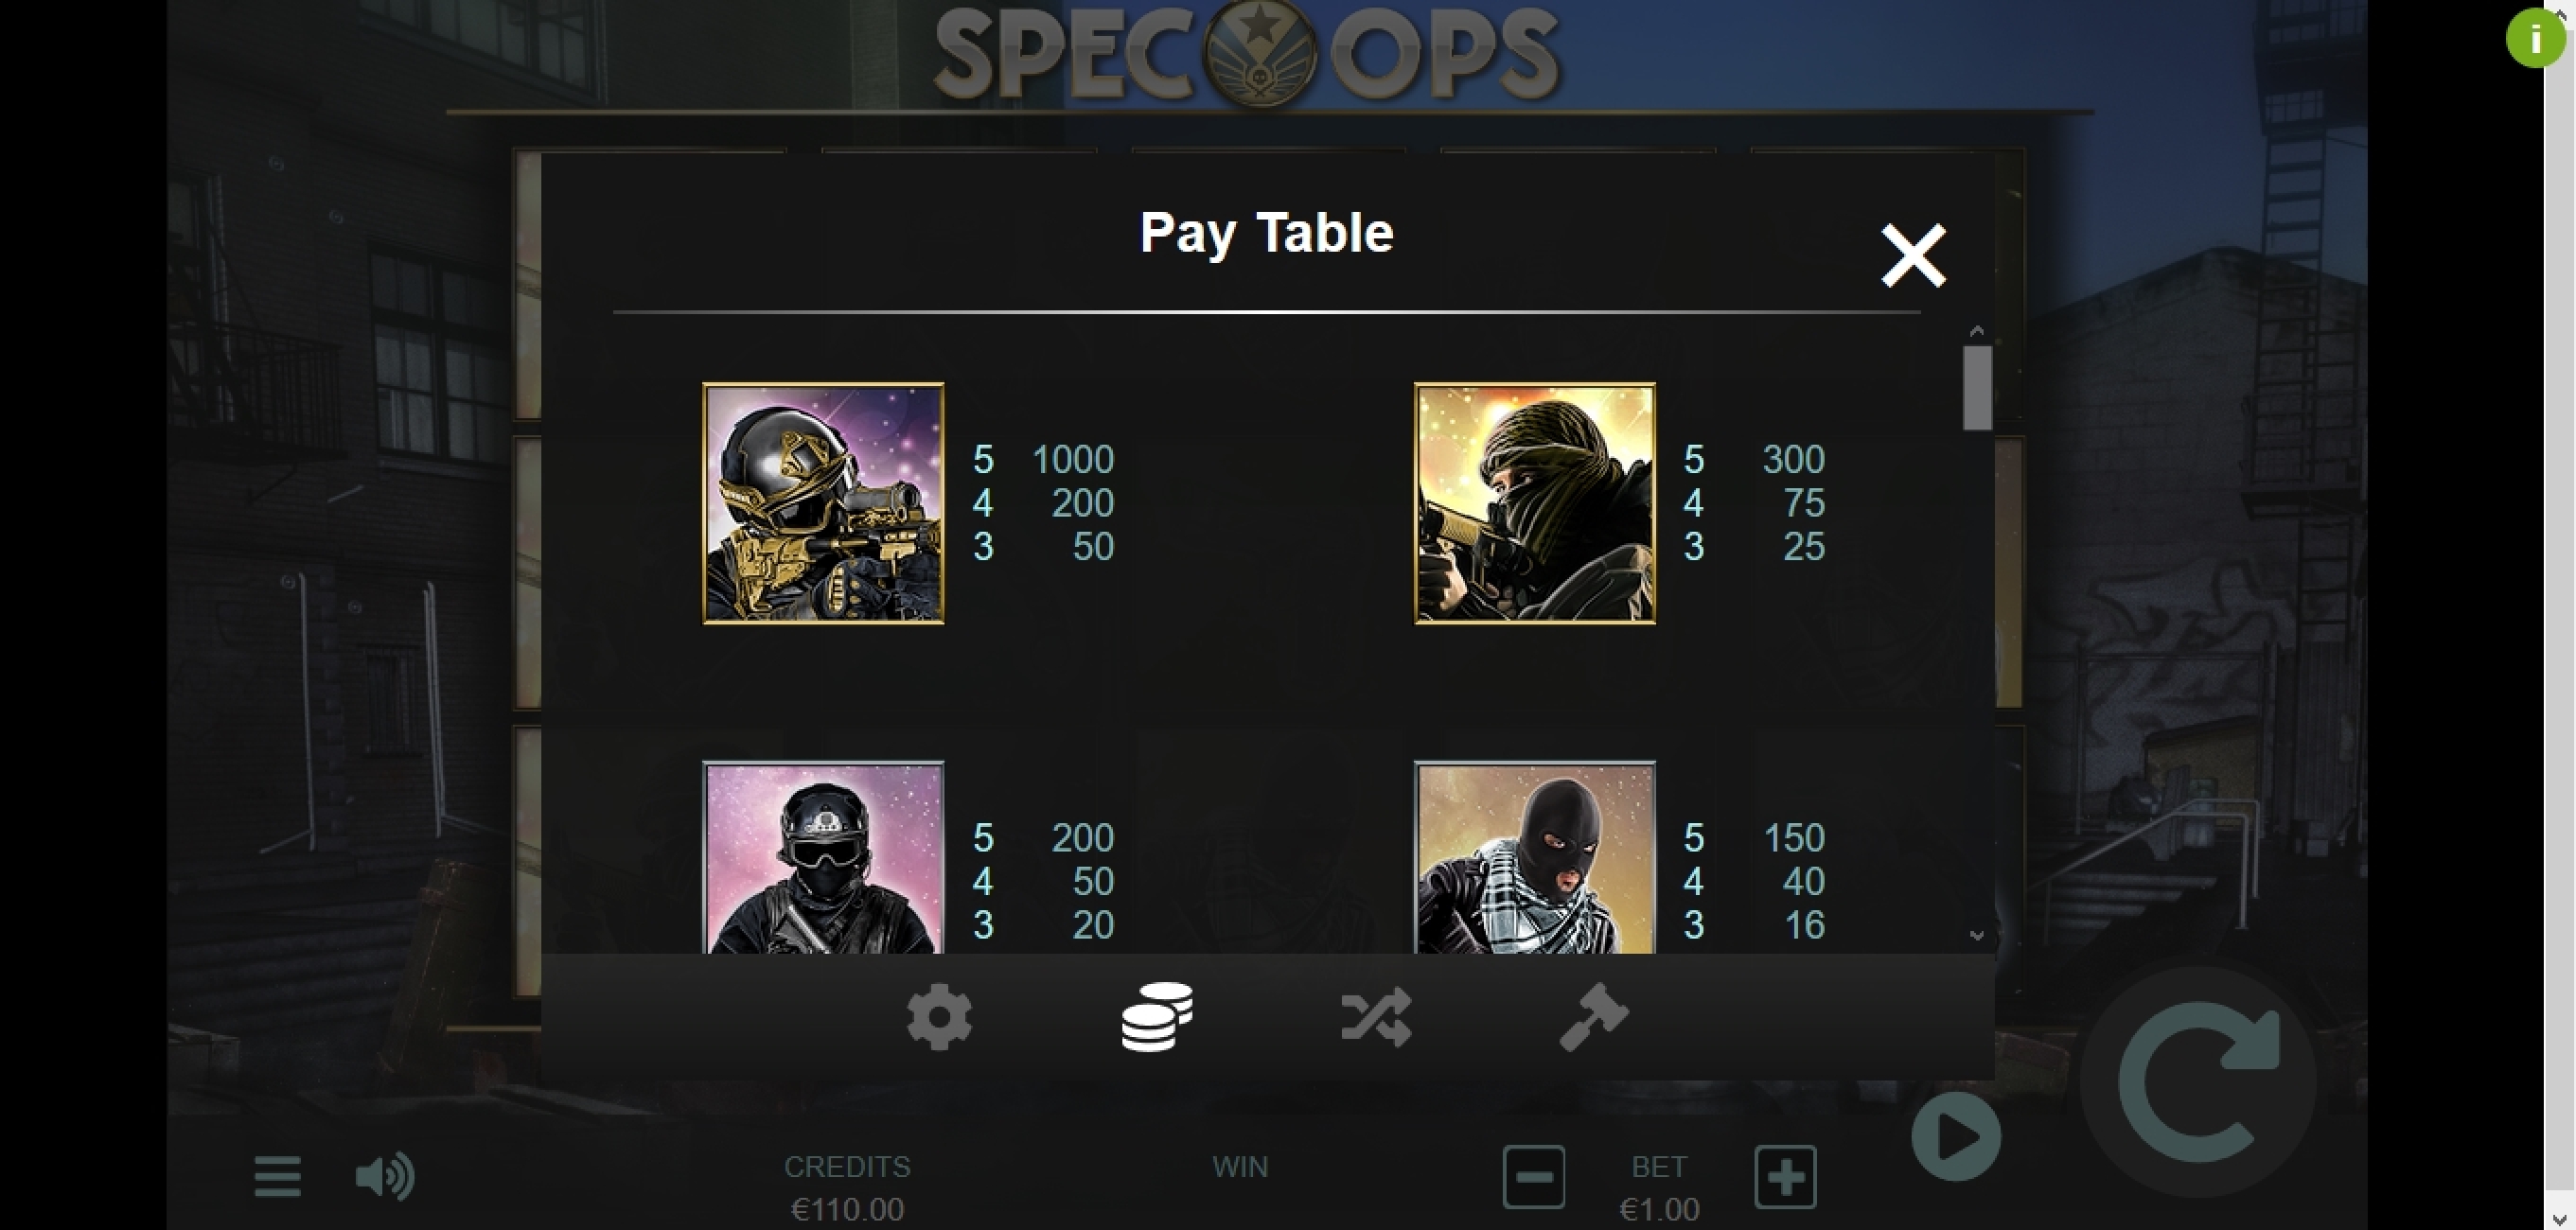 Info of Spec-Ops Slot Game by Cubeia